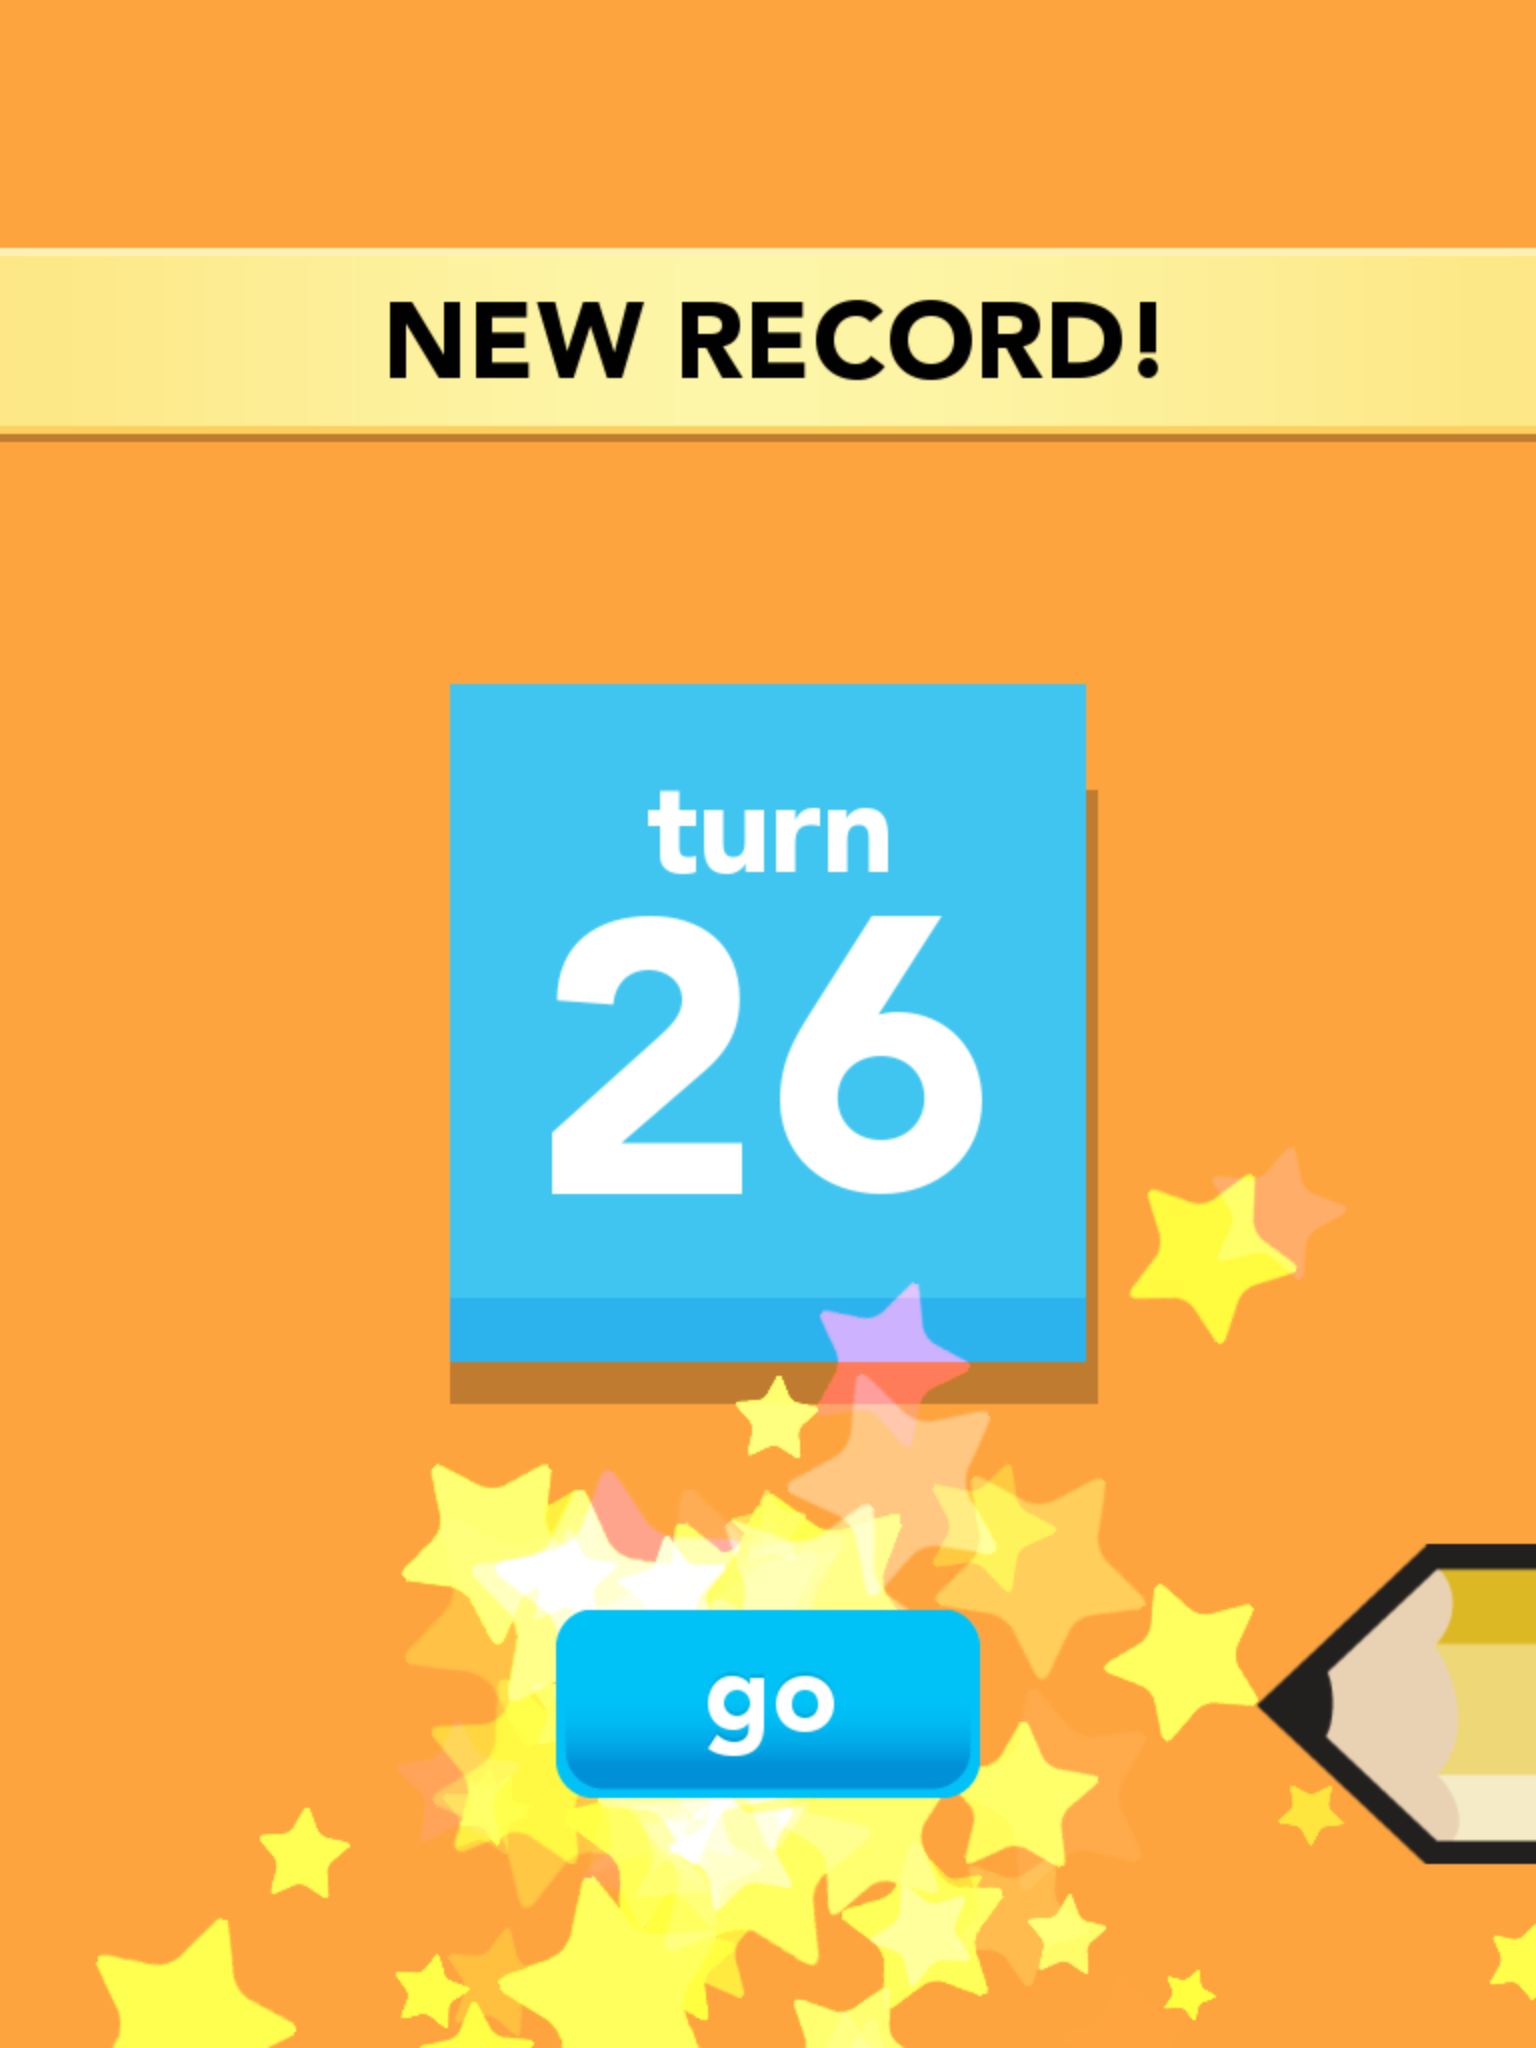 Draw Something Is an Evil Time-Waster That I Can't Stop Playing